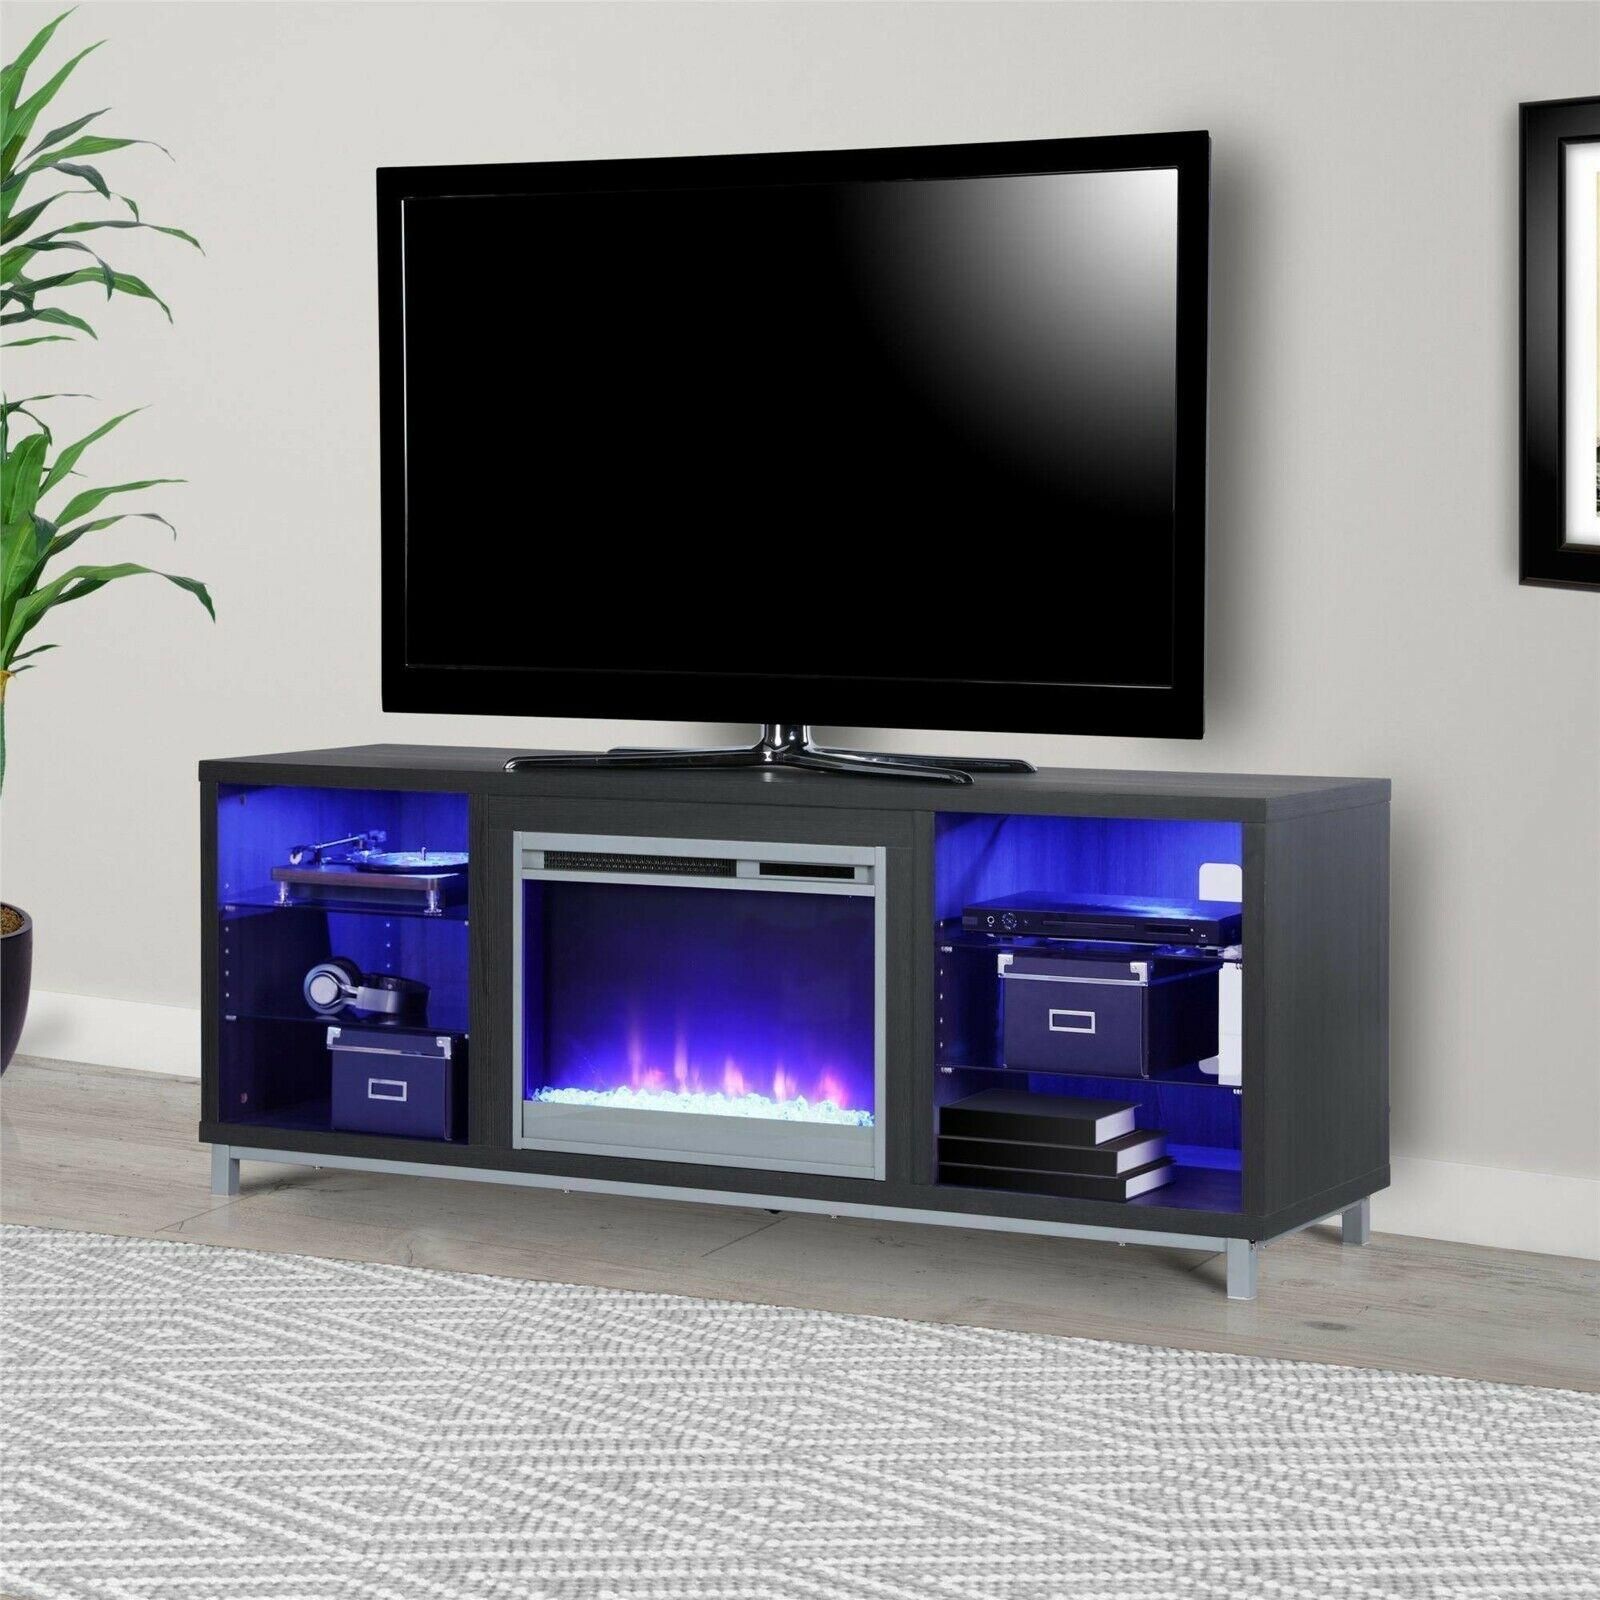 Ameriwood Home Lumina Fireplace Tv Stand For Tvs With Ameriwood Home Rhea Tv Stands For Tvs Up To 70" In Black Oak (View 6 of 20)